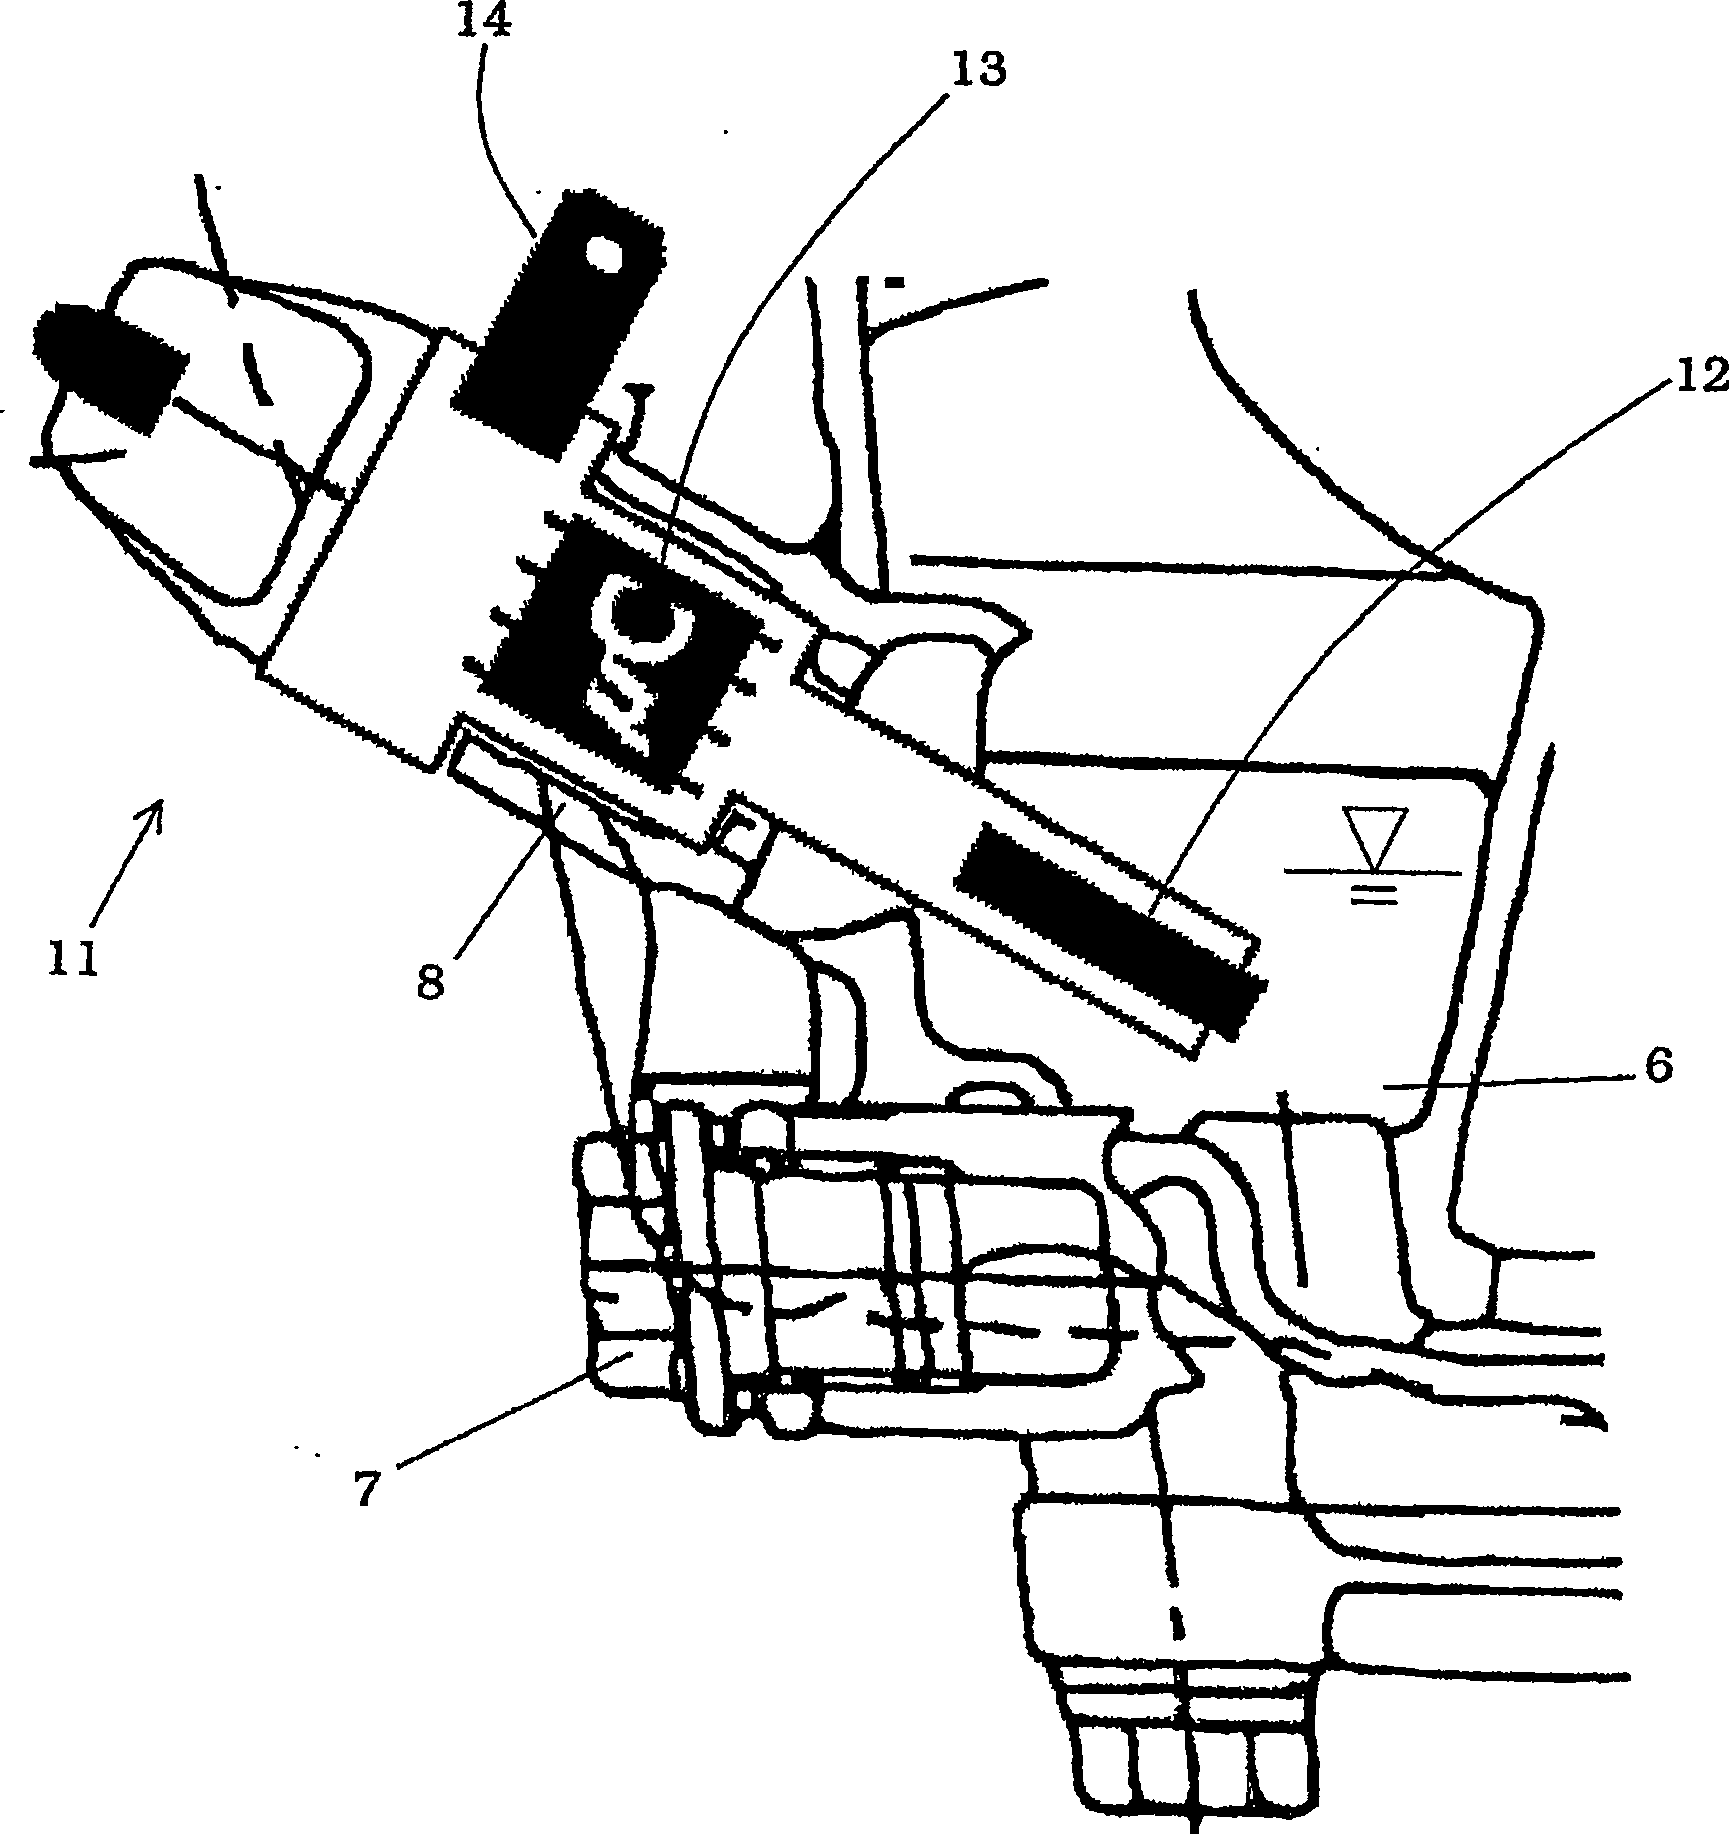 Oil level monitoring system for an internal combustion engine